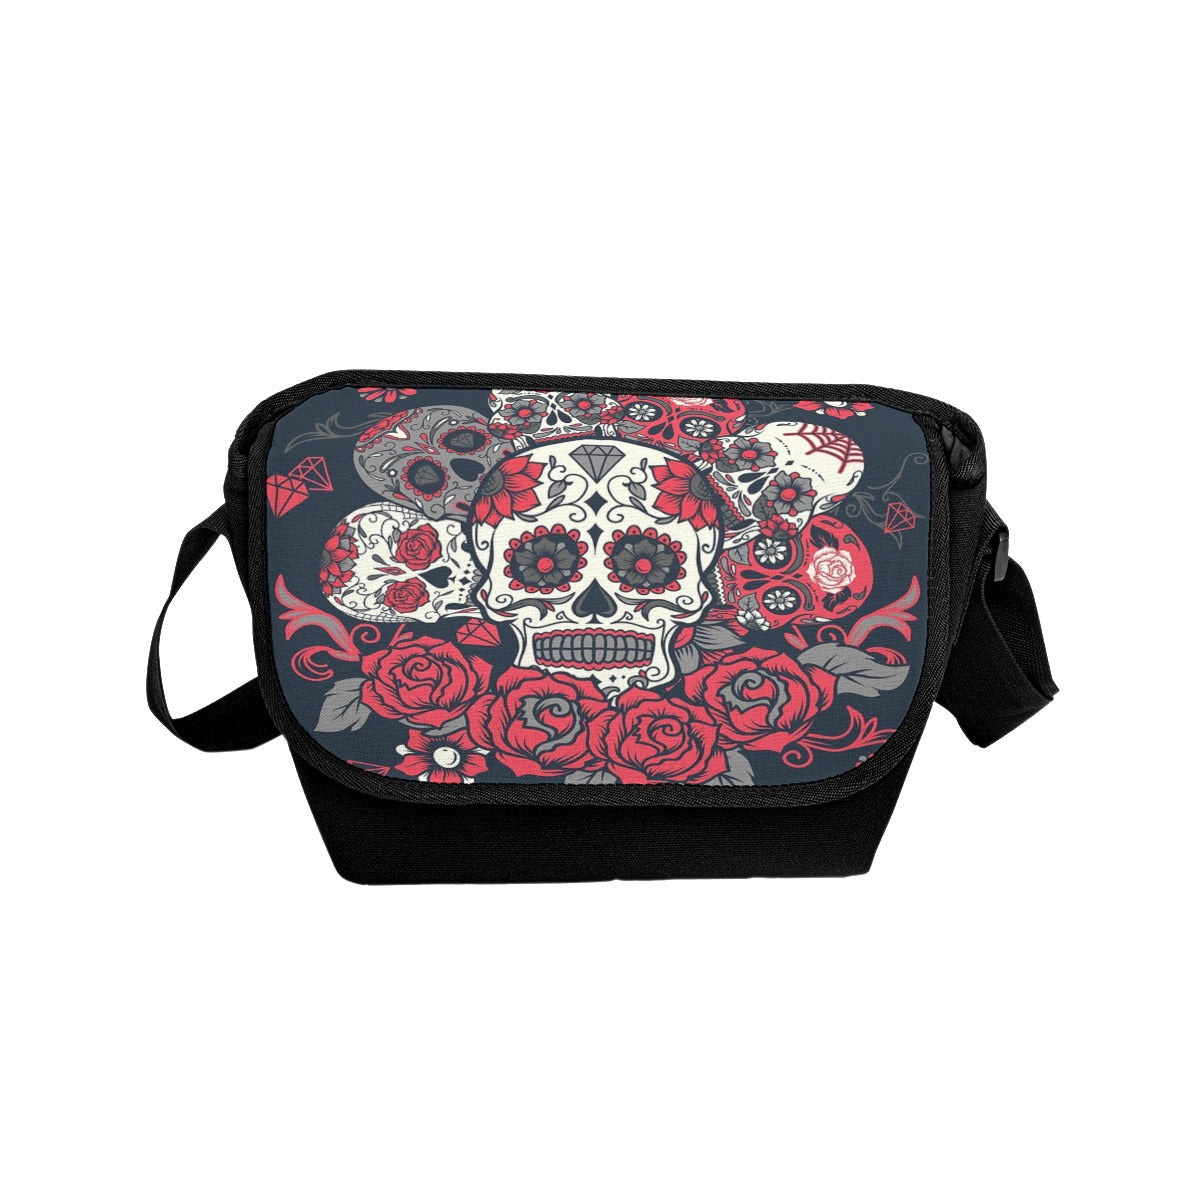 Day of the dead Gothic Mexican skull Messenger Bags, Halloween sugar skull floral messenger bag